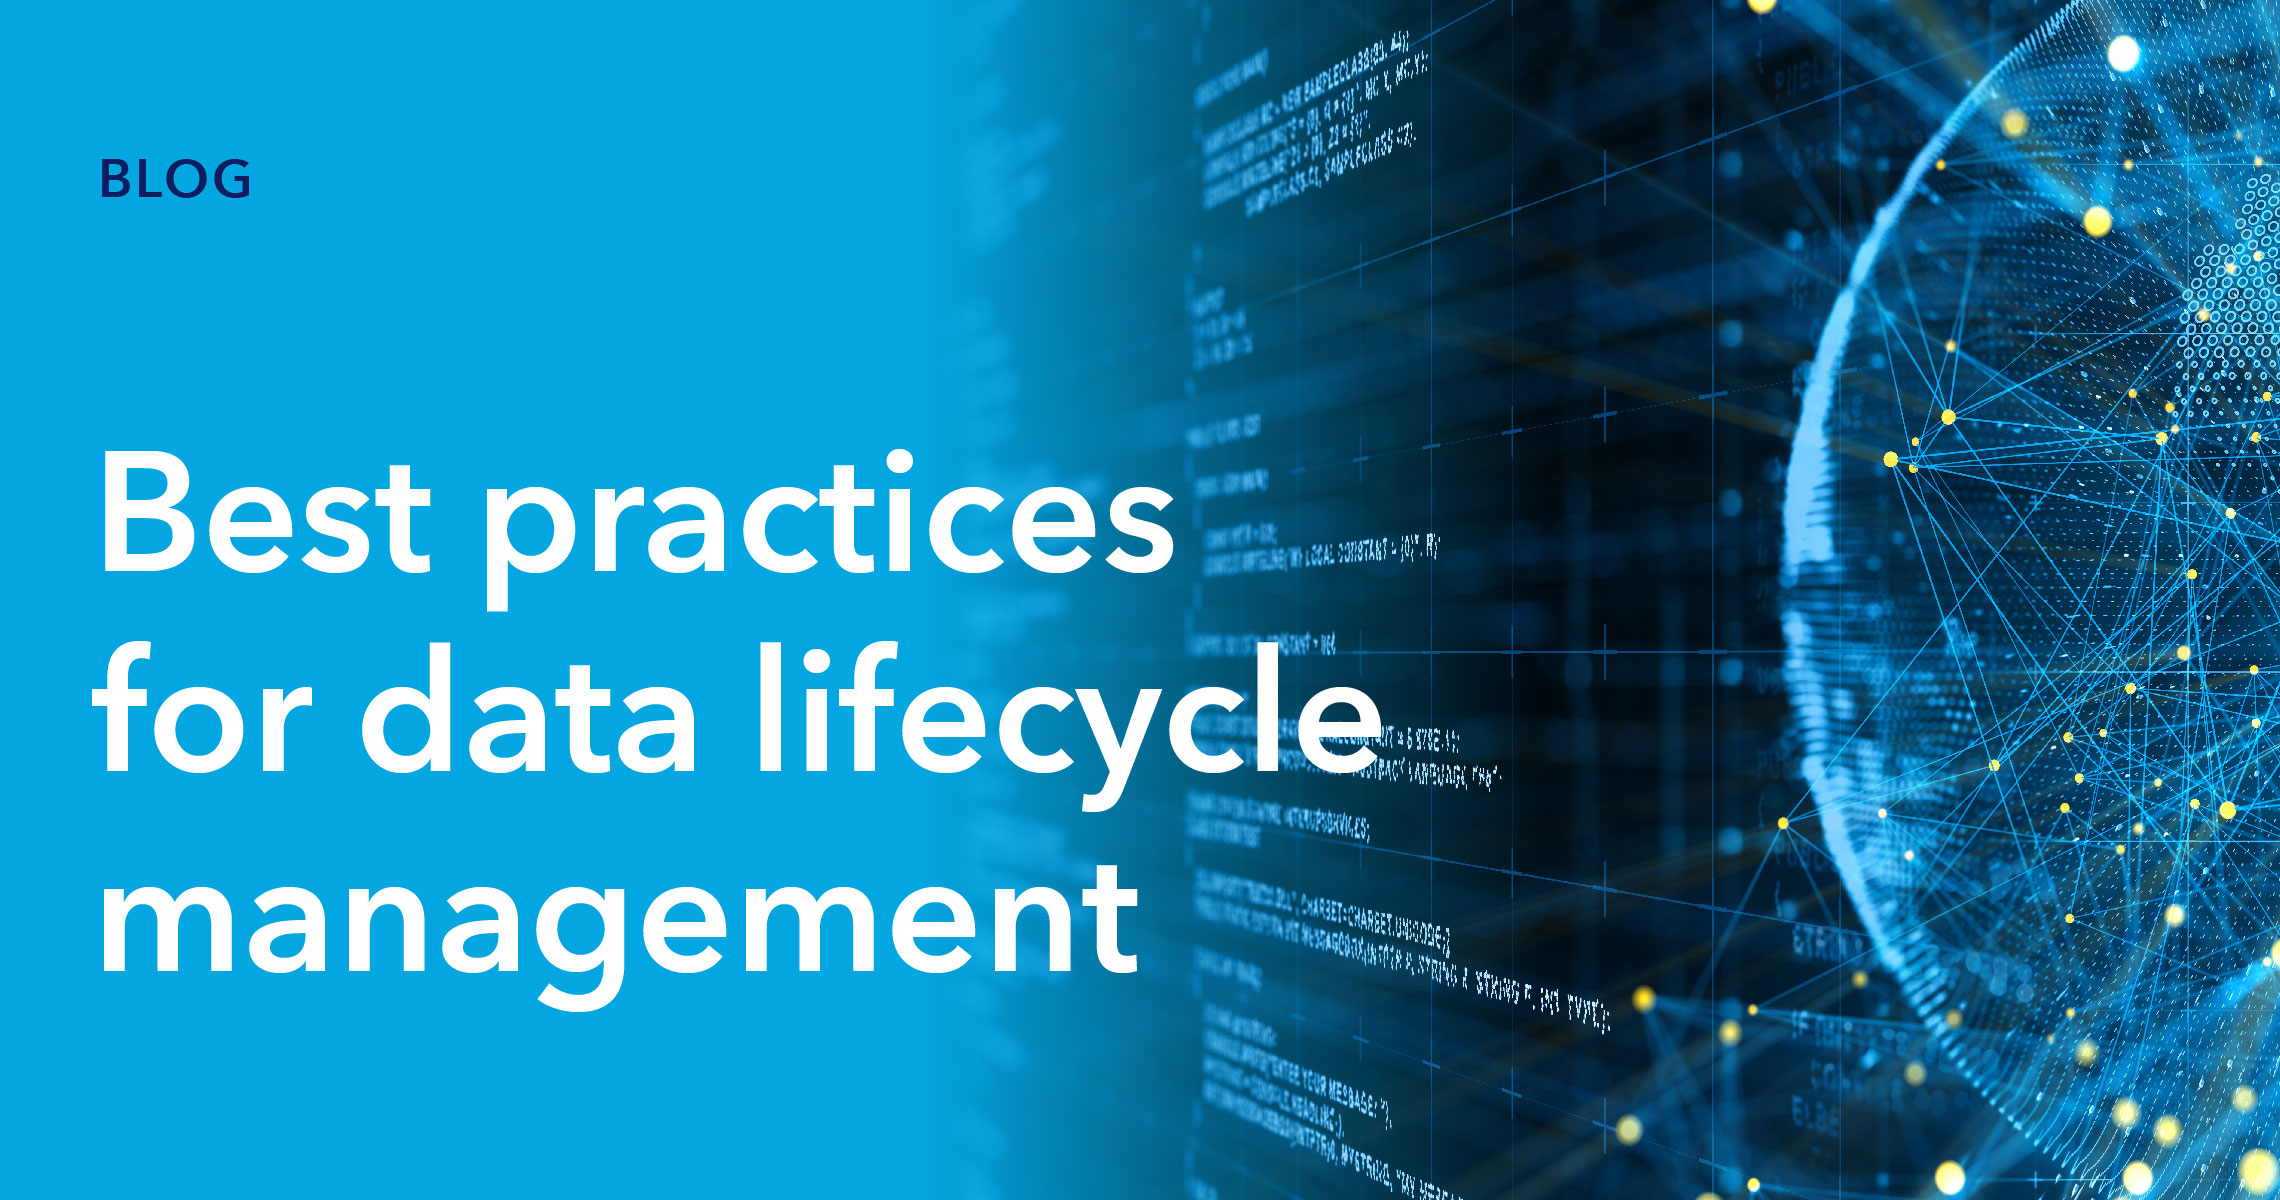 Data lifecycle management